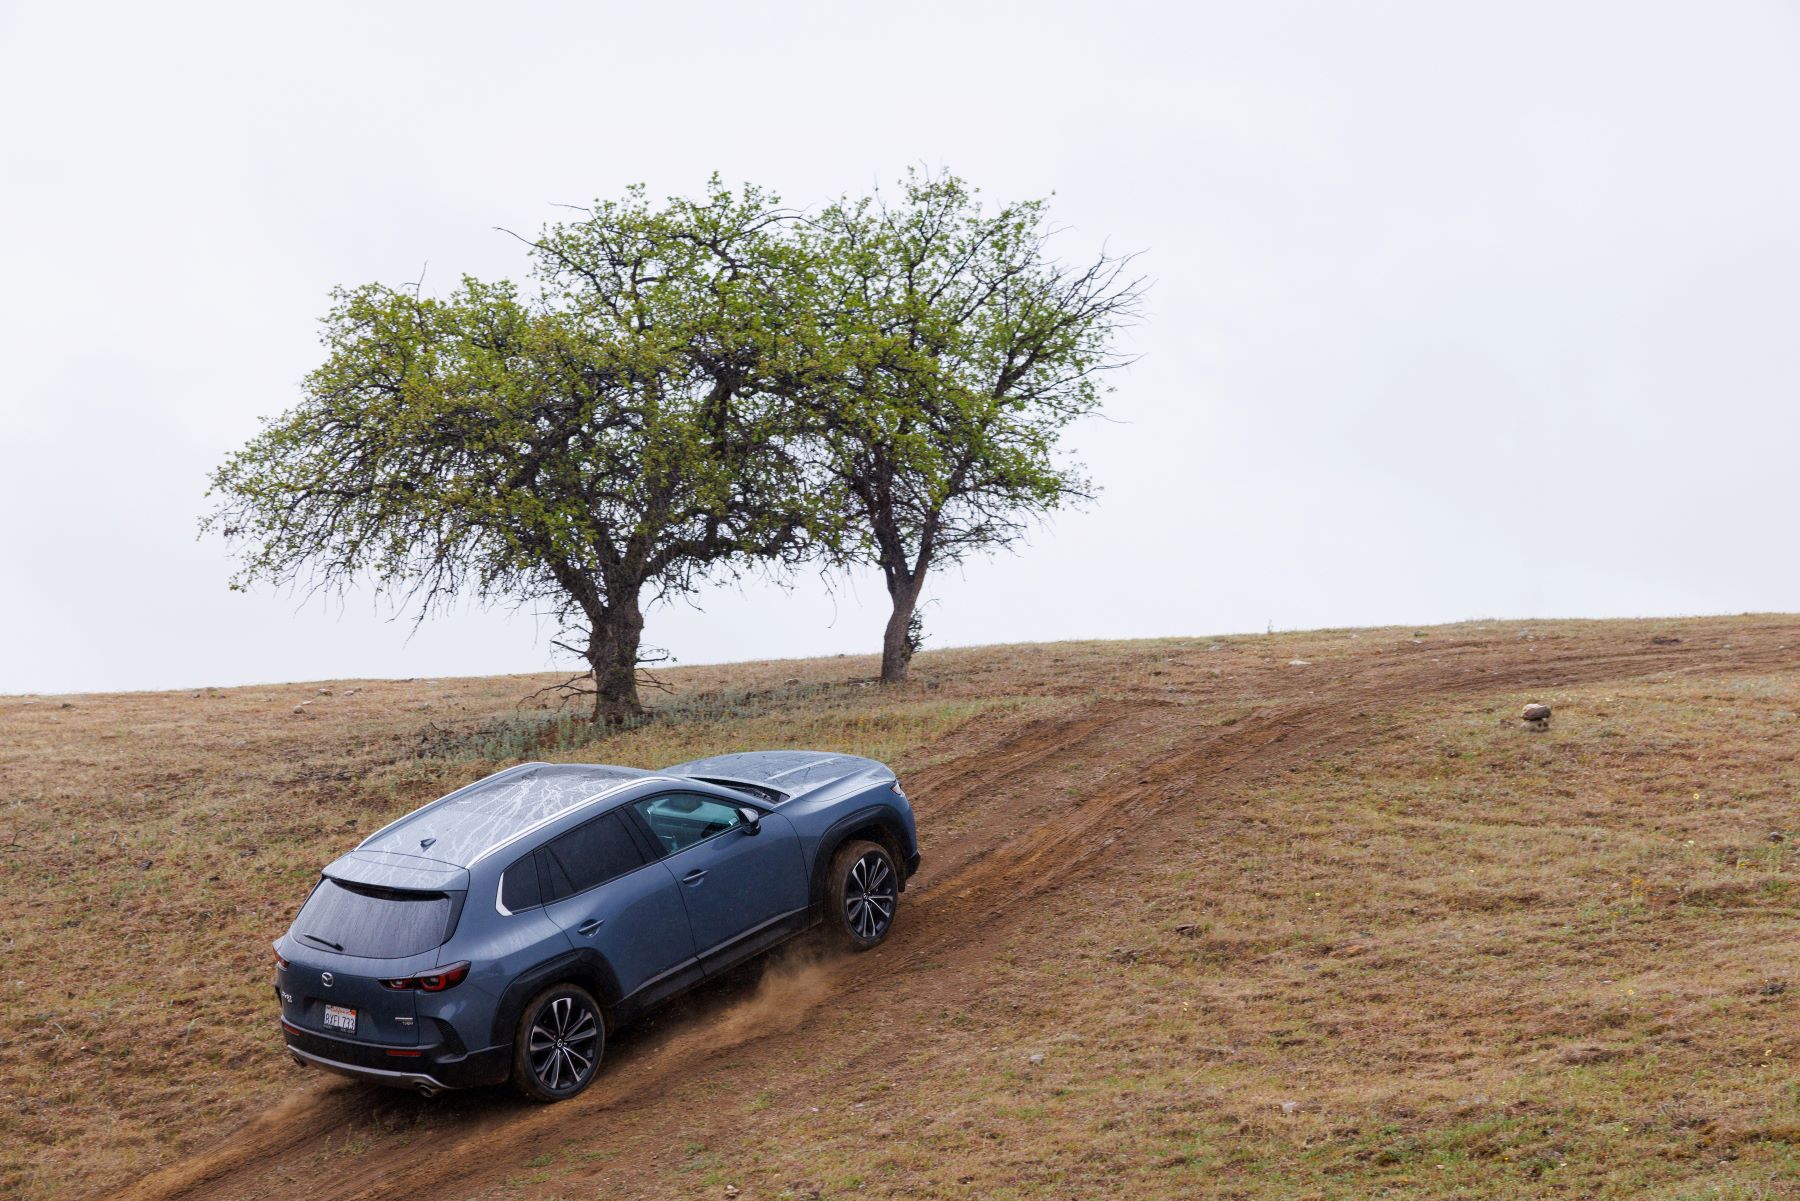 A 2023 Mazda CX-50 compact crossover SUV model climbing a grass hill on a dirt road